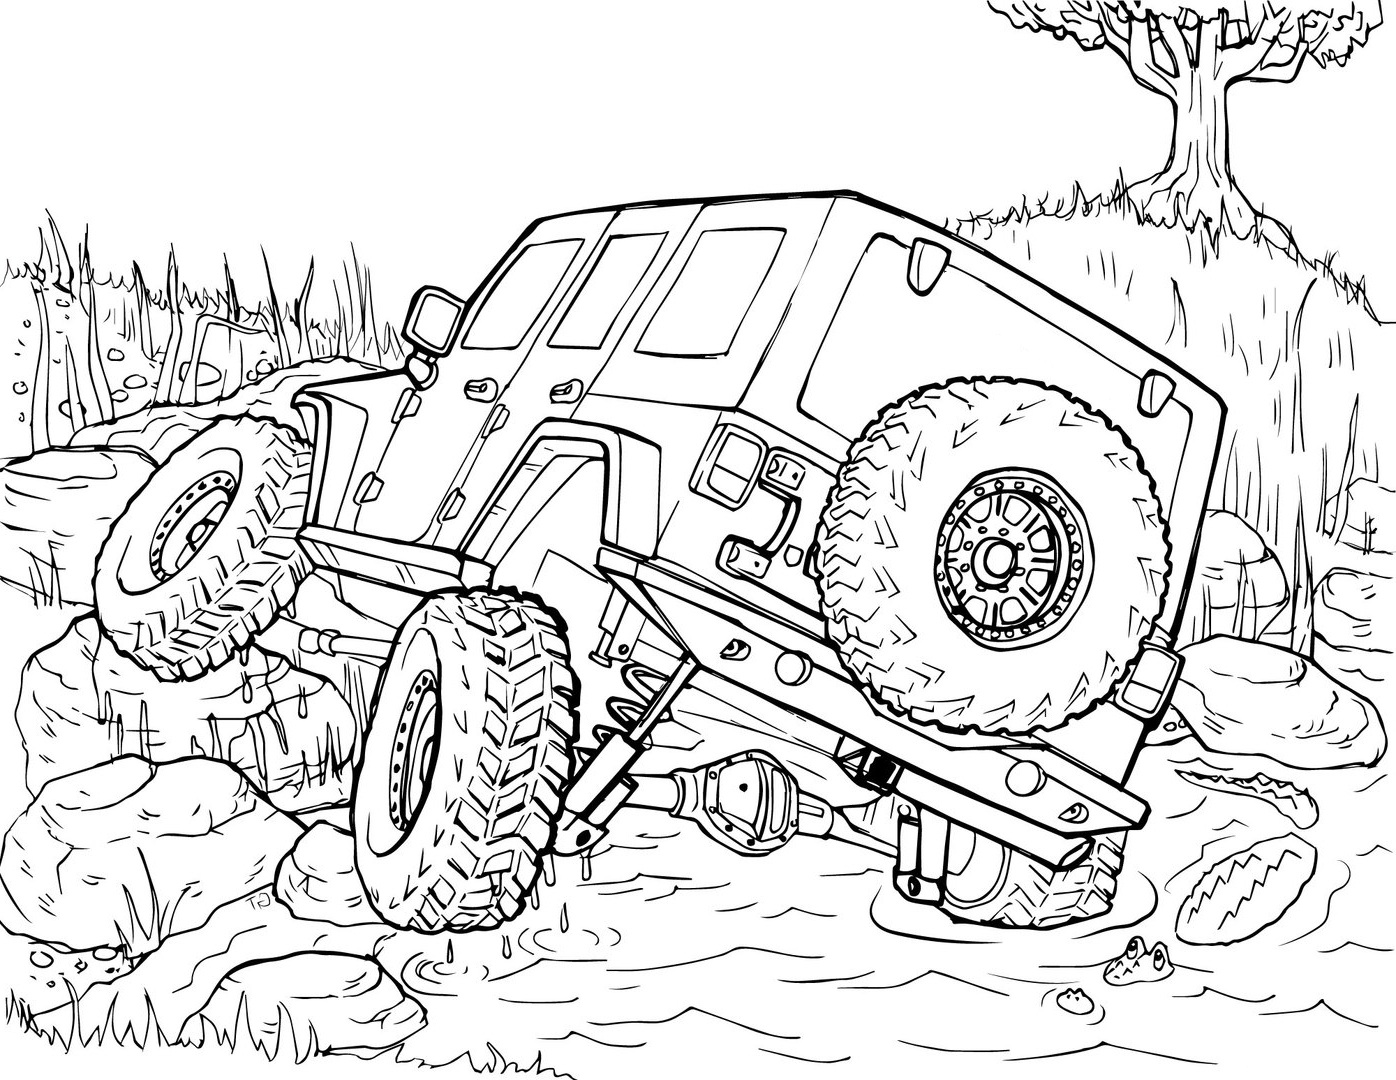 Jeep Wrangler coloring book in the mud to print and online